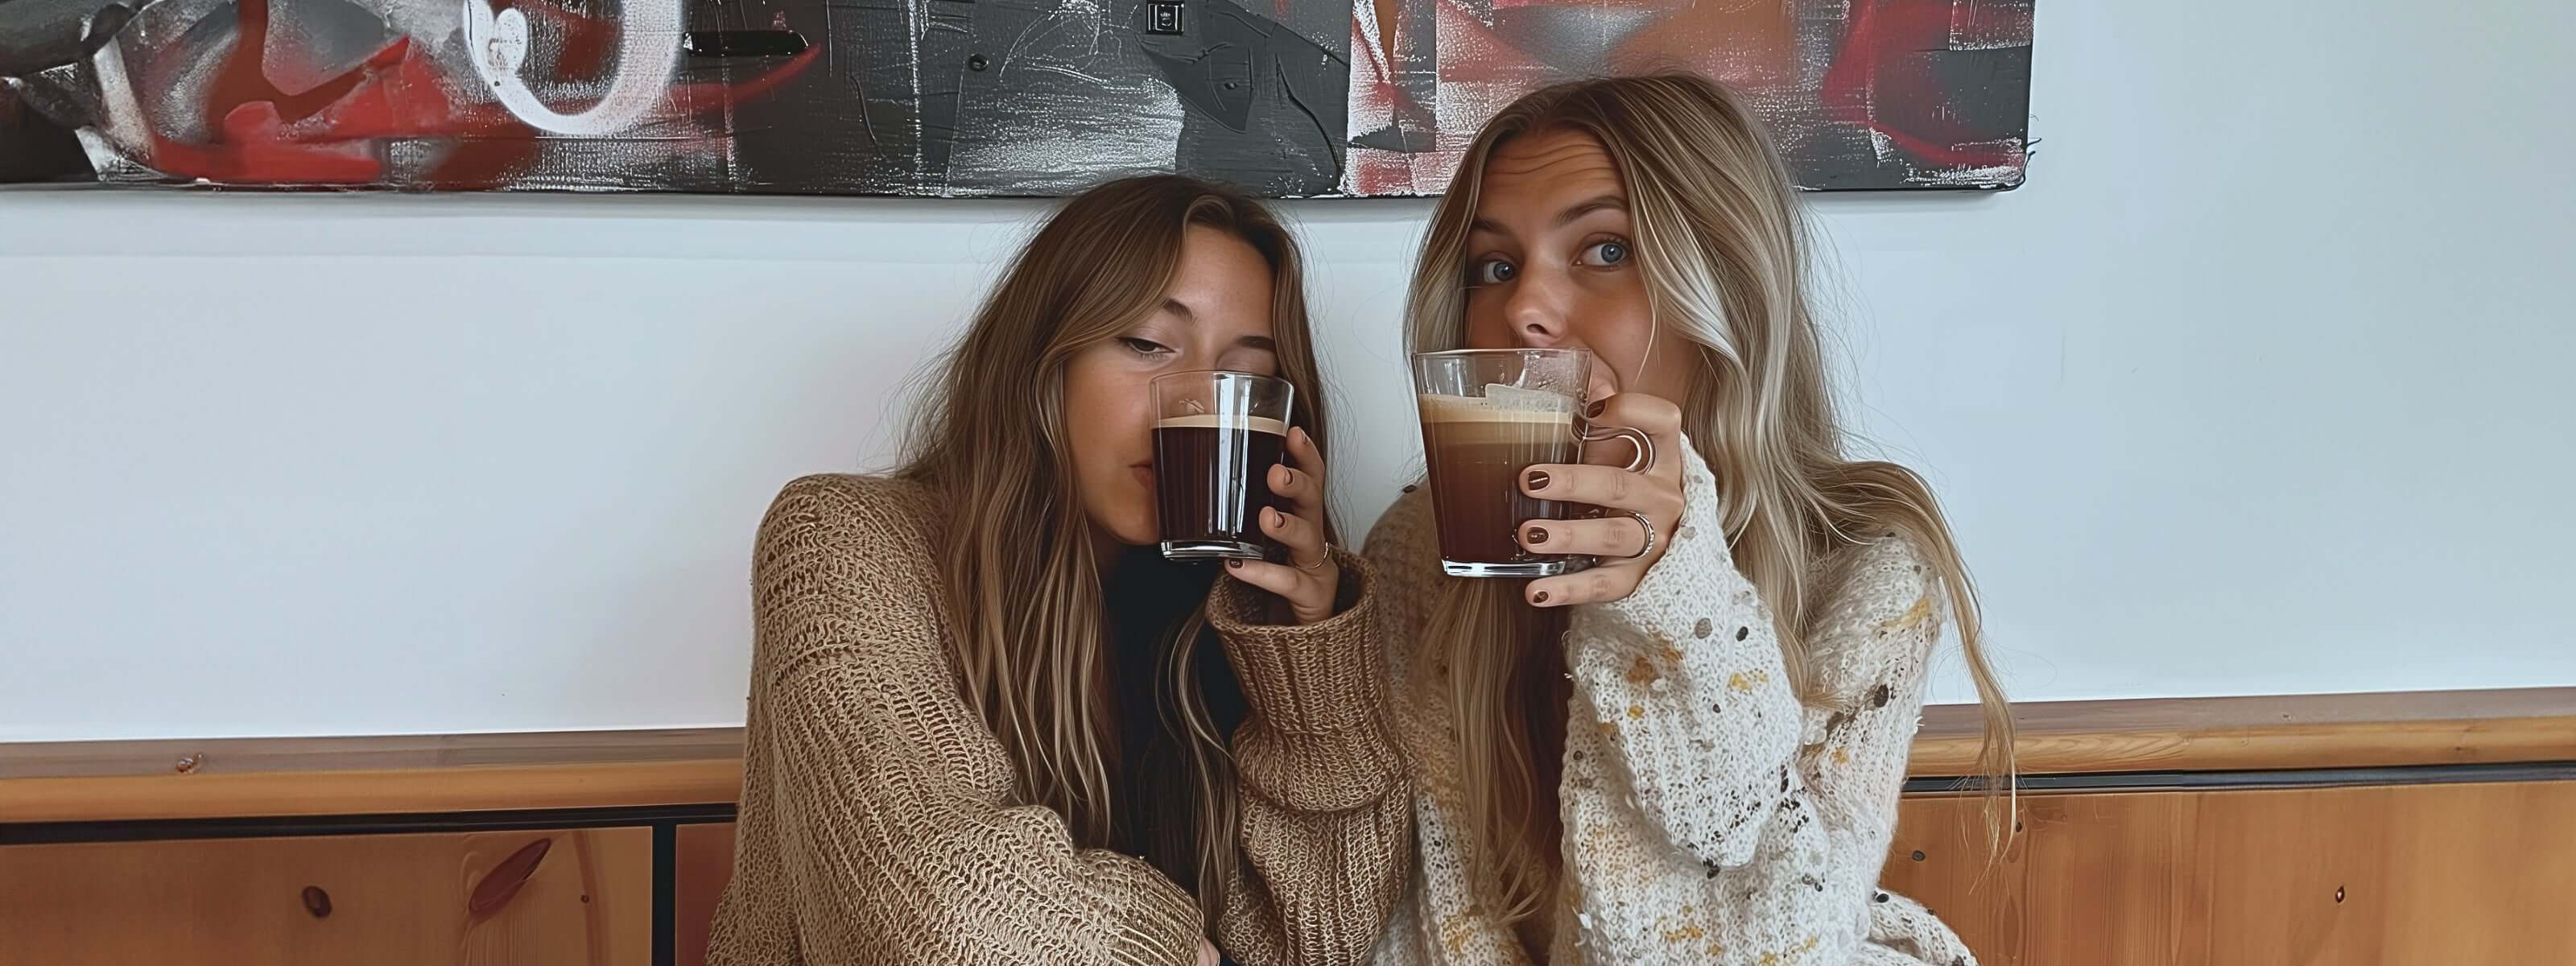 two young girls sharing confidences while drinking mugs of coffee.